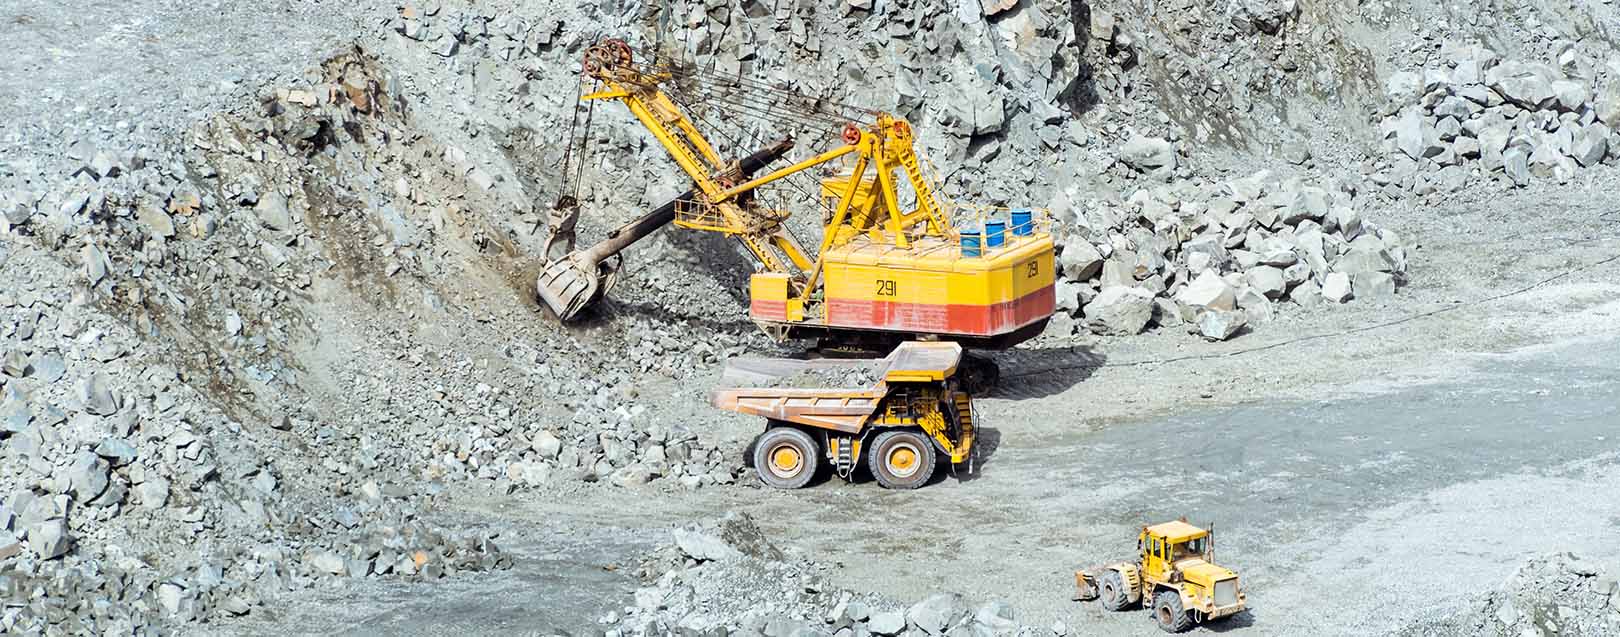 Index of mineral production witnesses 1.3% growth in May